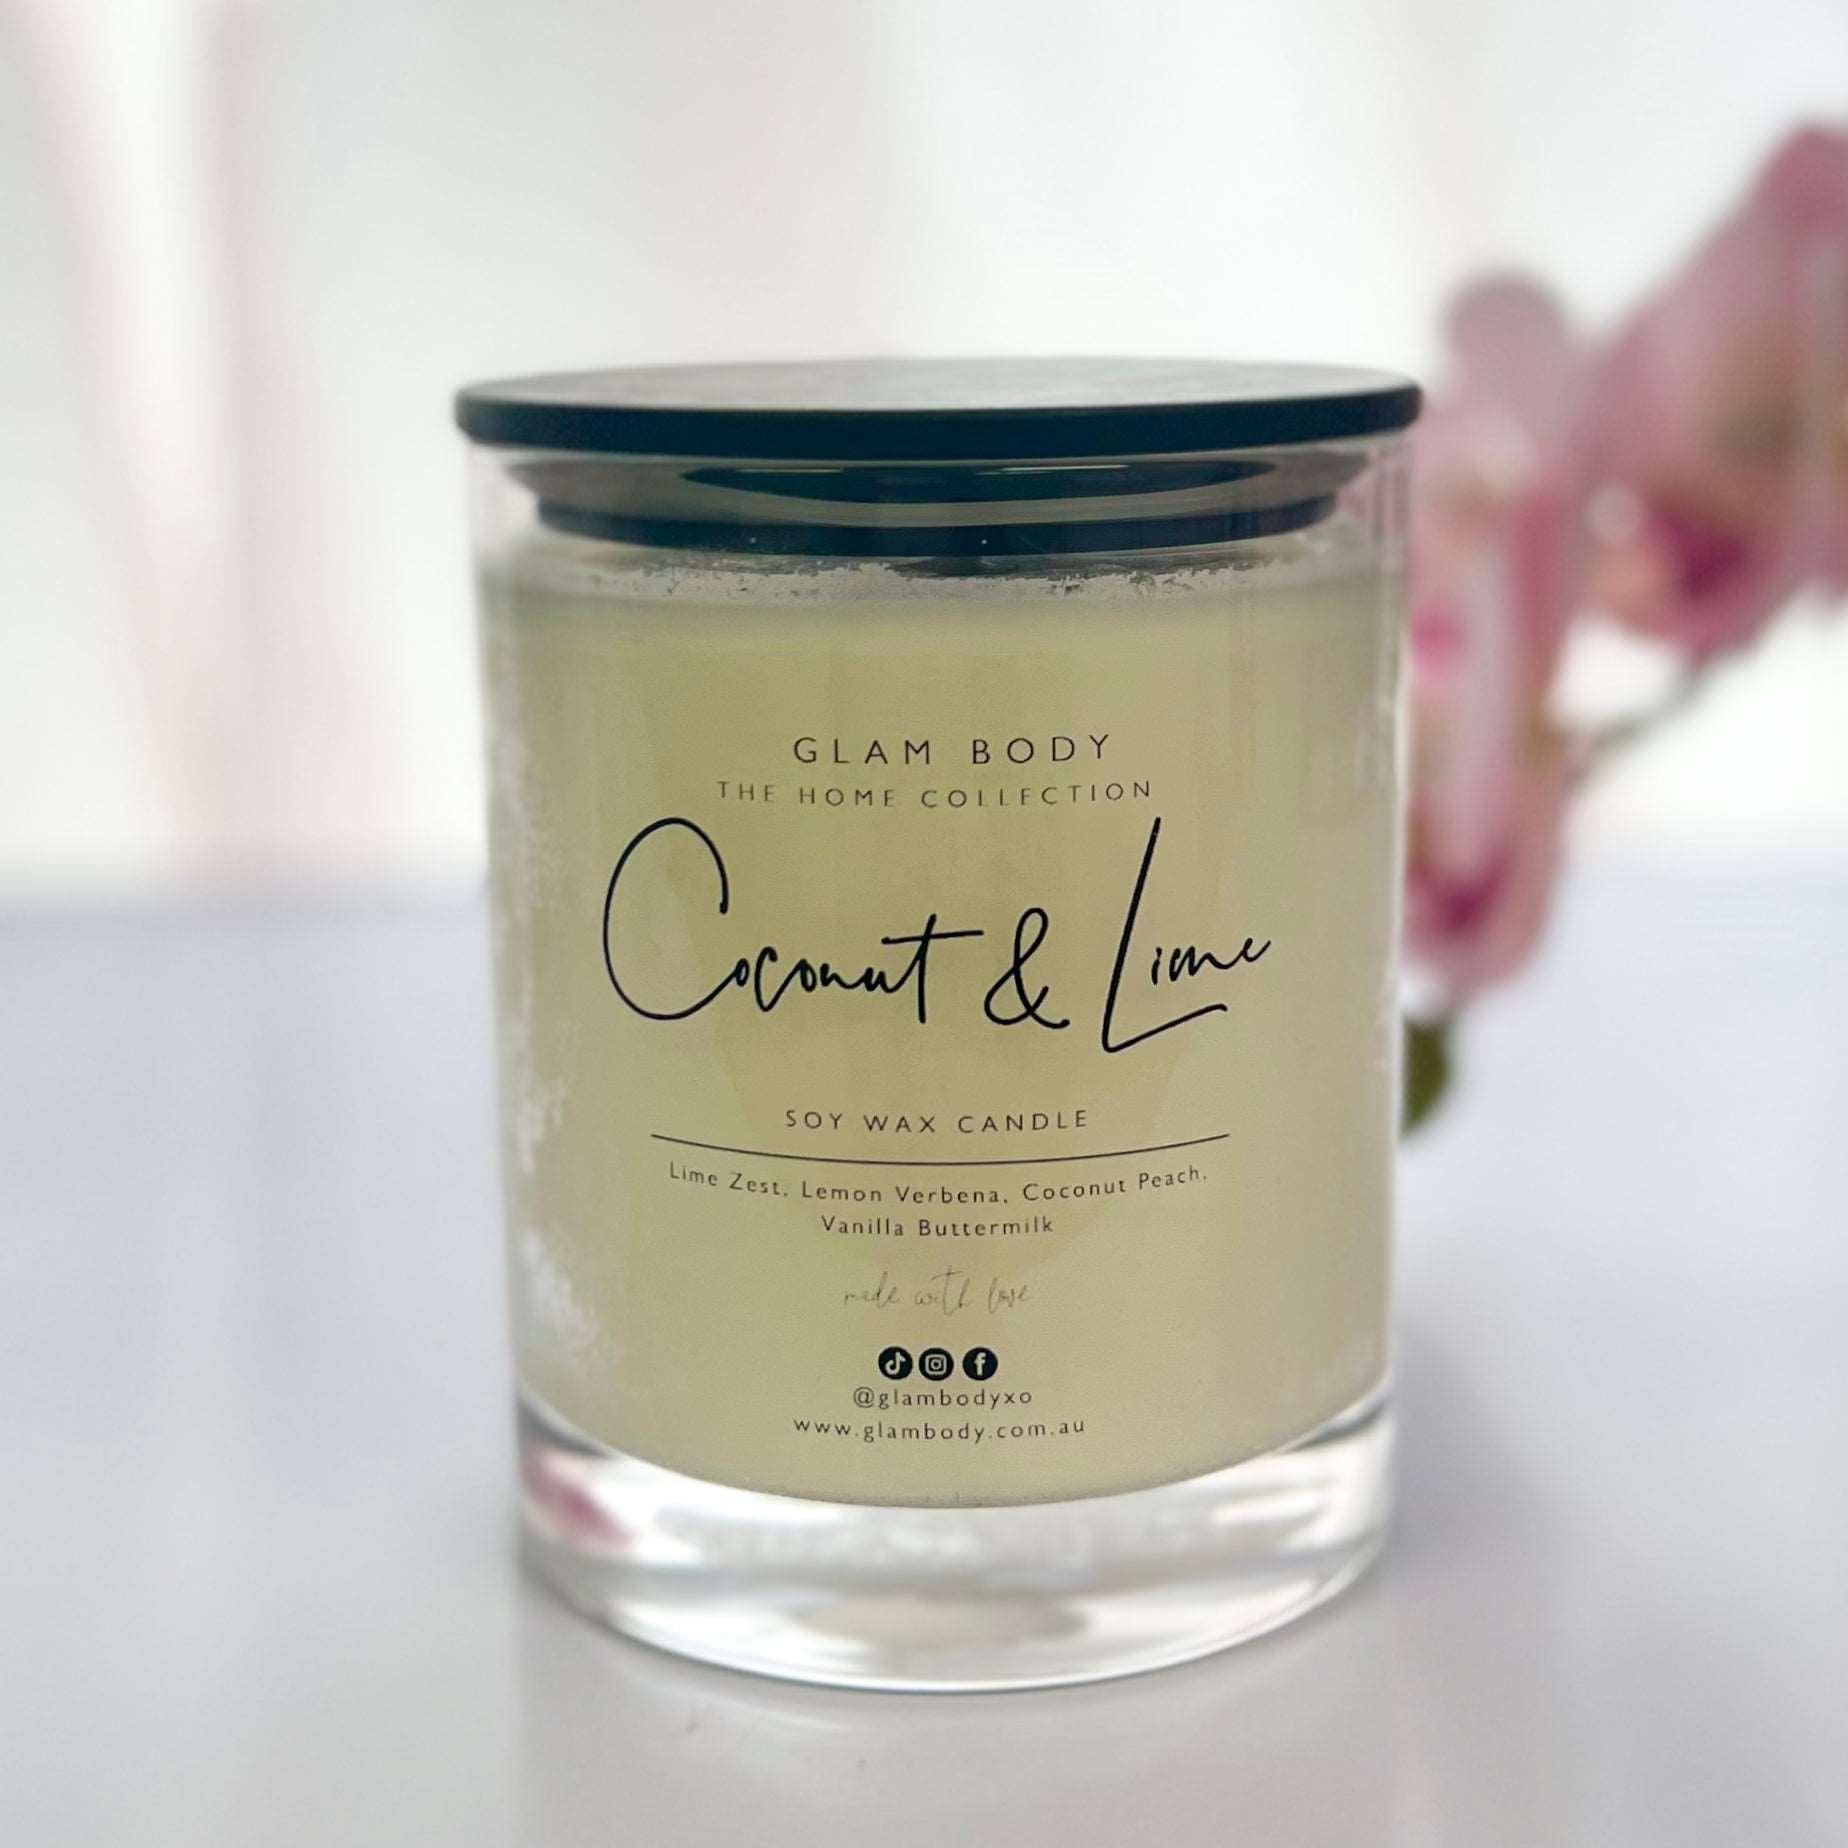 COCONUT & LIME SOY WAX CANDLE